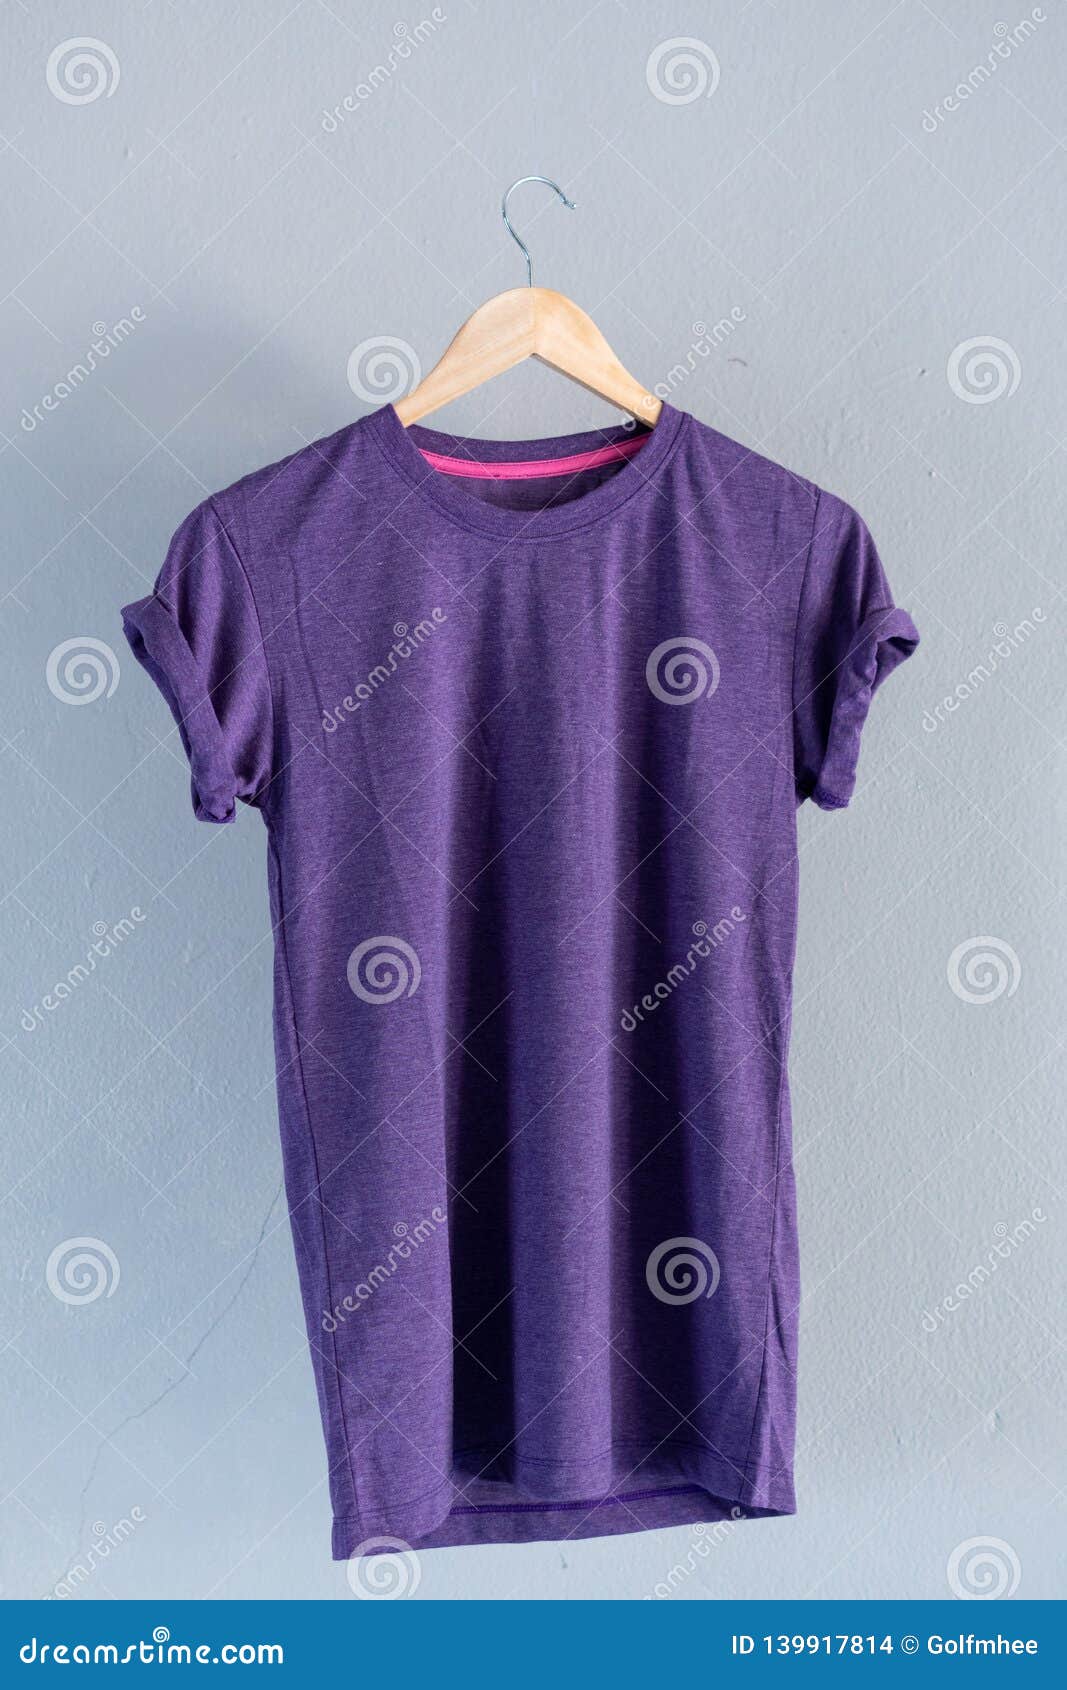 Retro Fold Purple Cotton T-Shirt Clothes Mock Up Template on Grunge ...